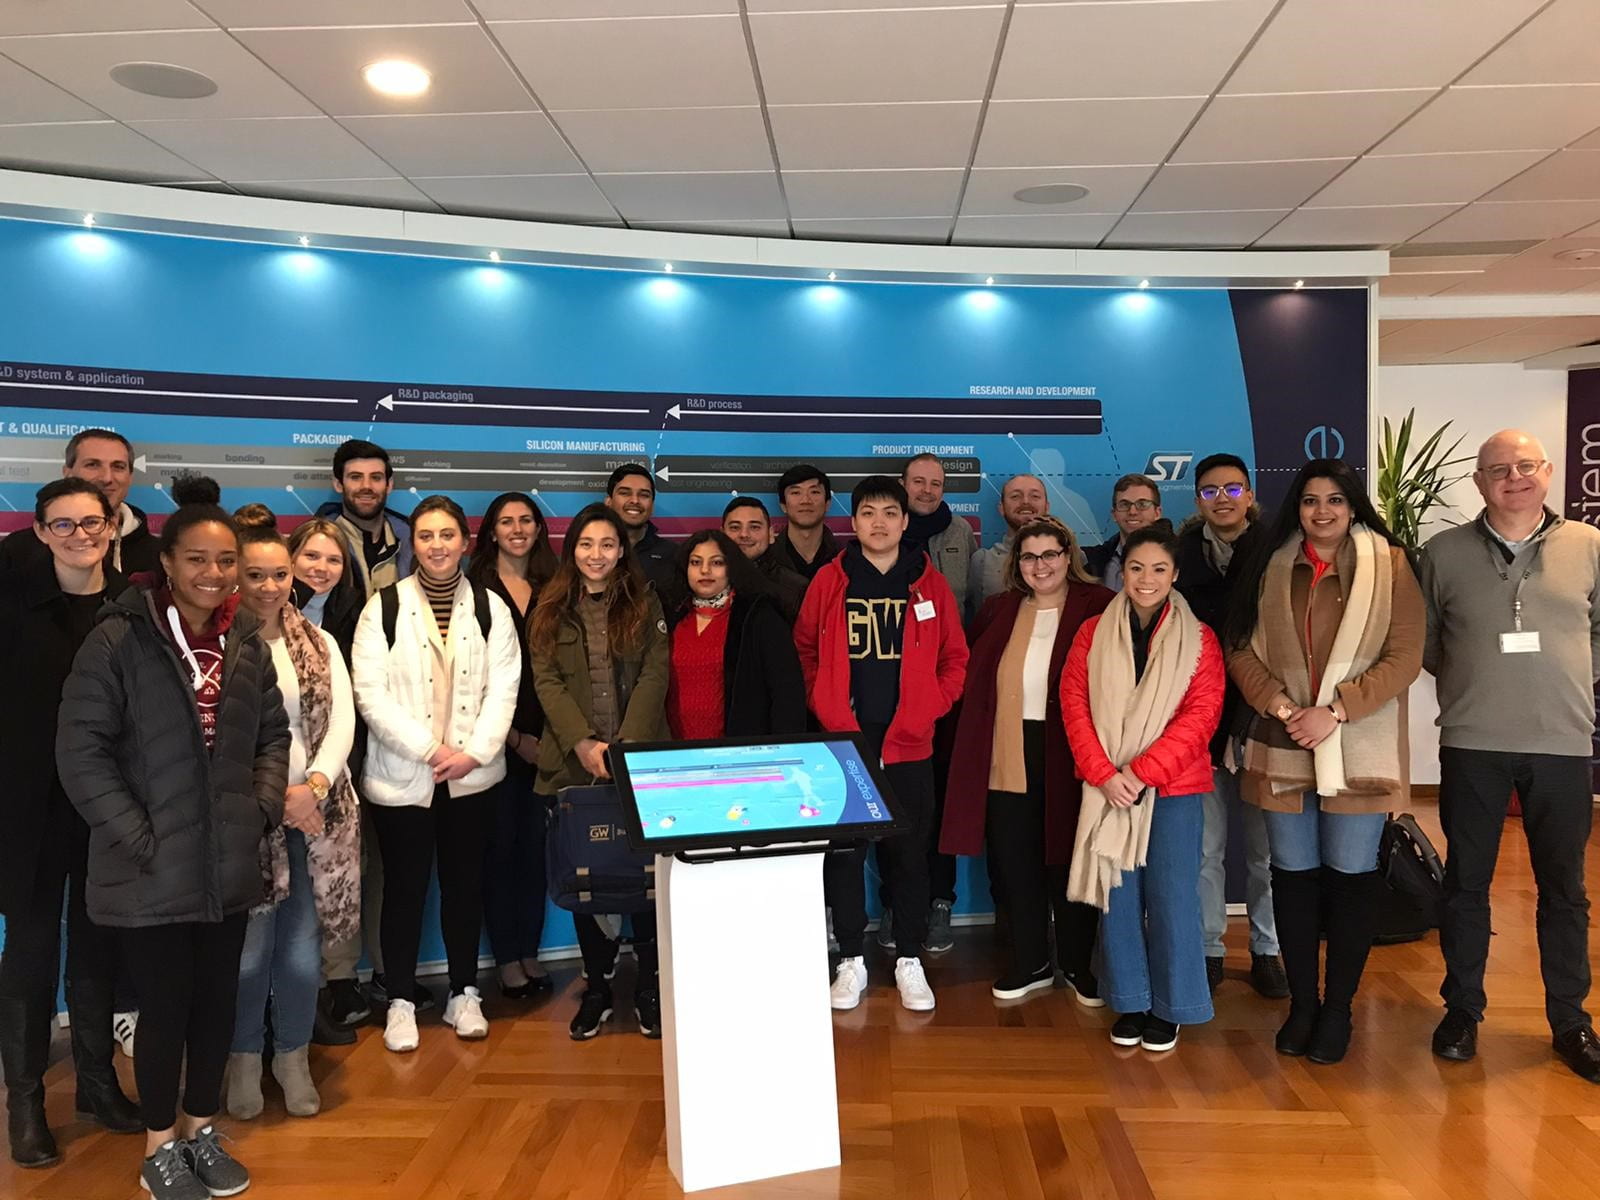 Students from GW, Duke, and UNC visit ST MicroElectronics. Grenoble is widely considered the “Silicon Valley” of France.